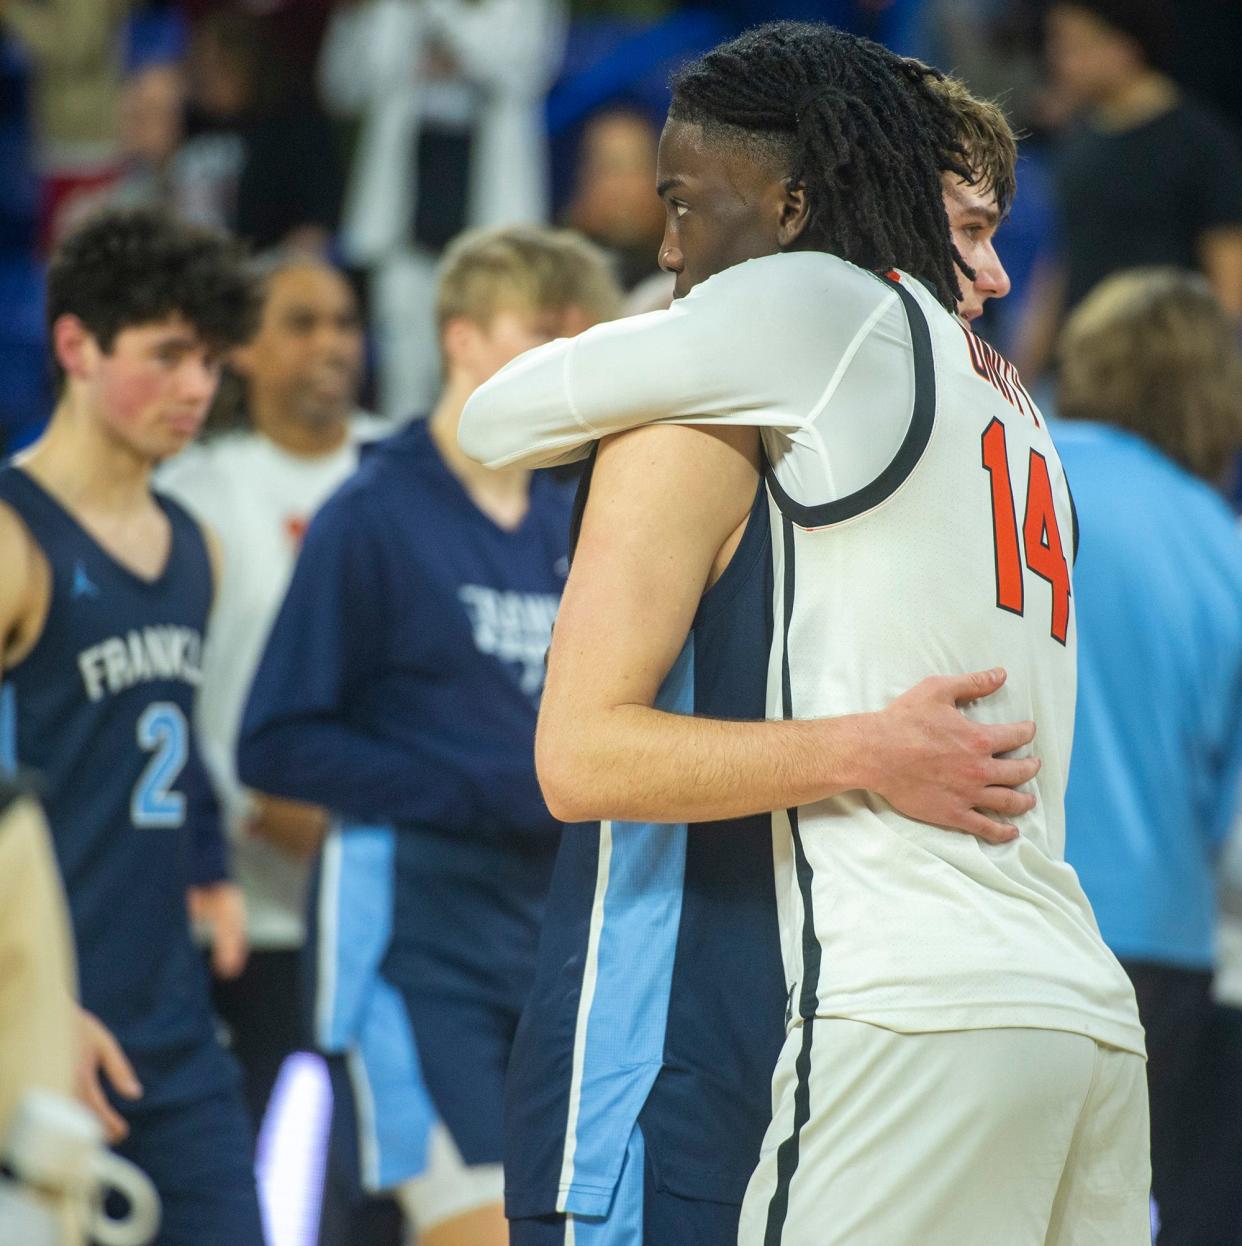 Worcester North senior Teshuan Steele, right, embraces Franklin High School senior captain Sean O'Leary after Franklin was defeated 59-53 in the Div. 1 state boys basketball final at the Tsongas Center in Lowell, March 17, 2024.